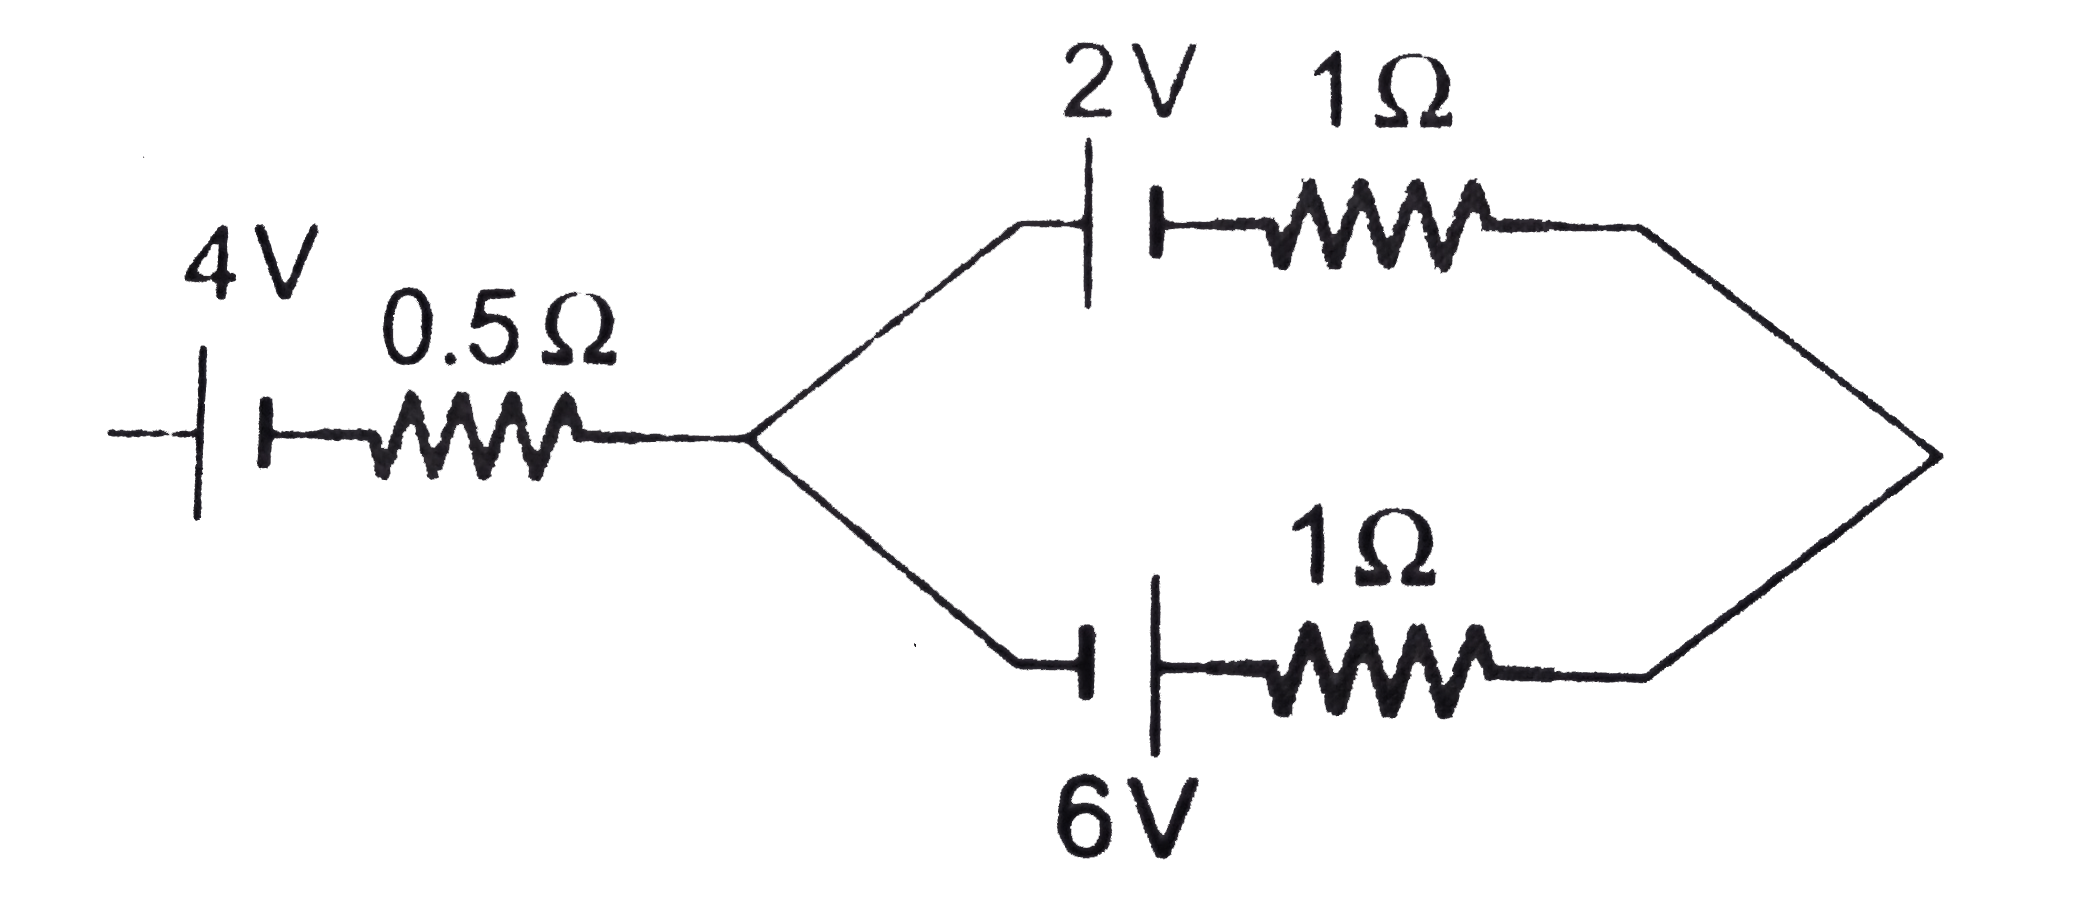 Find the net emf of the three batteries shown in figure